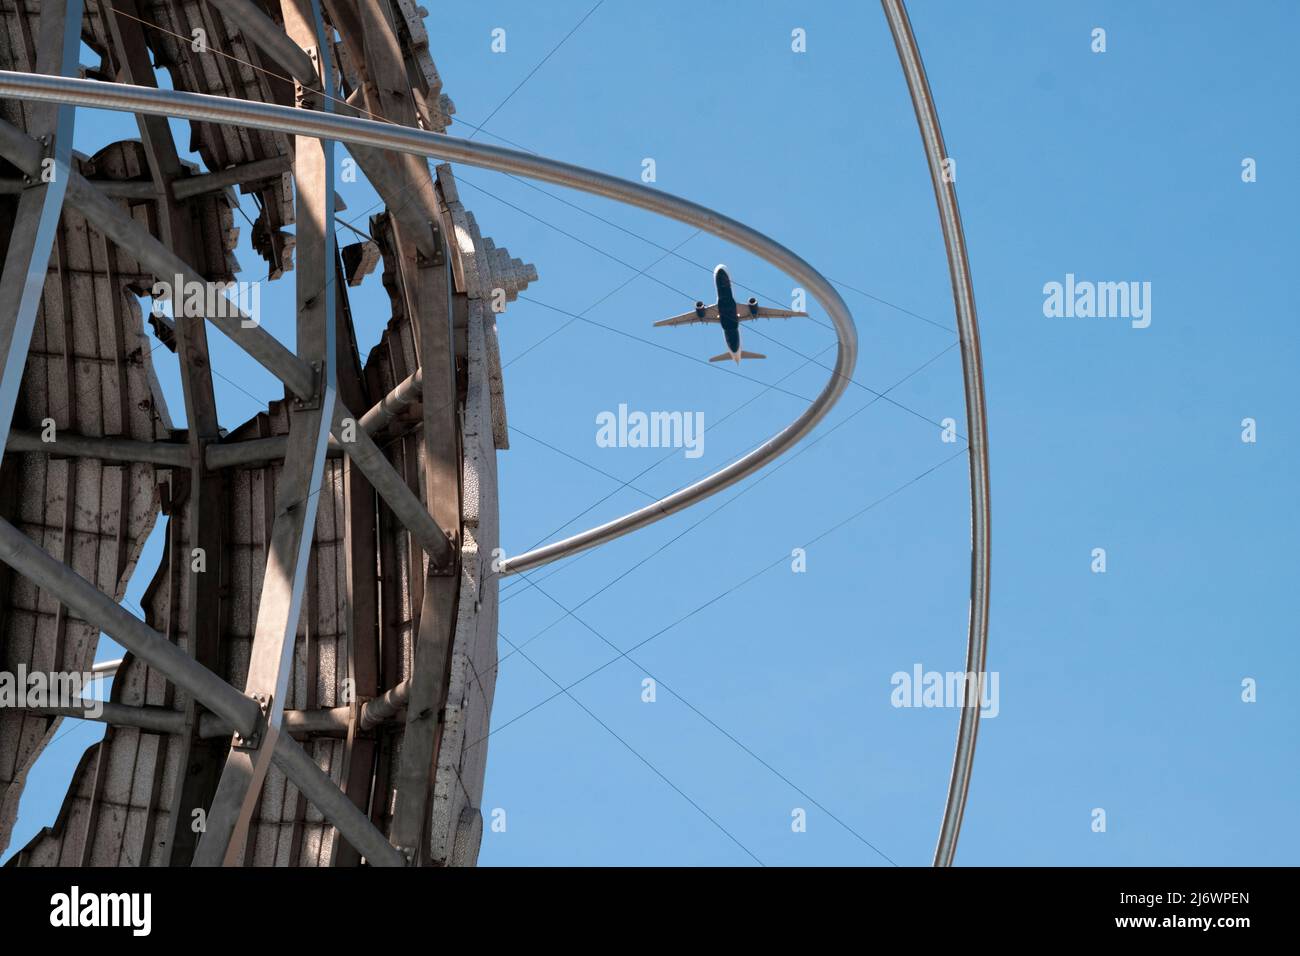 A plane taking off from LaGuardia Airport in Queens as seen through the Unisphere in Flushing Meadows Corona Park. Stock Photo